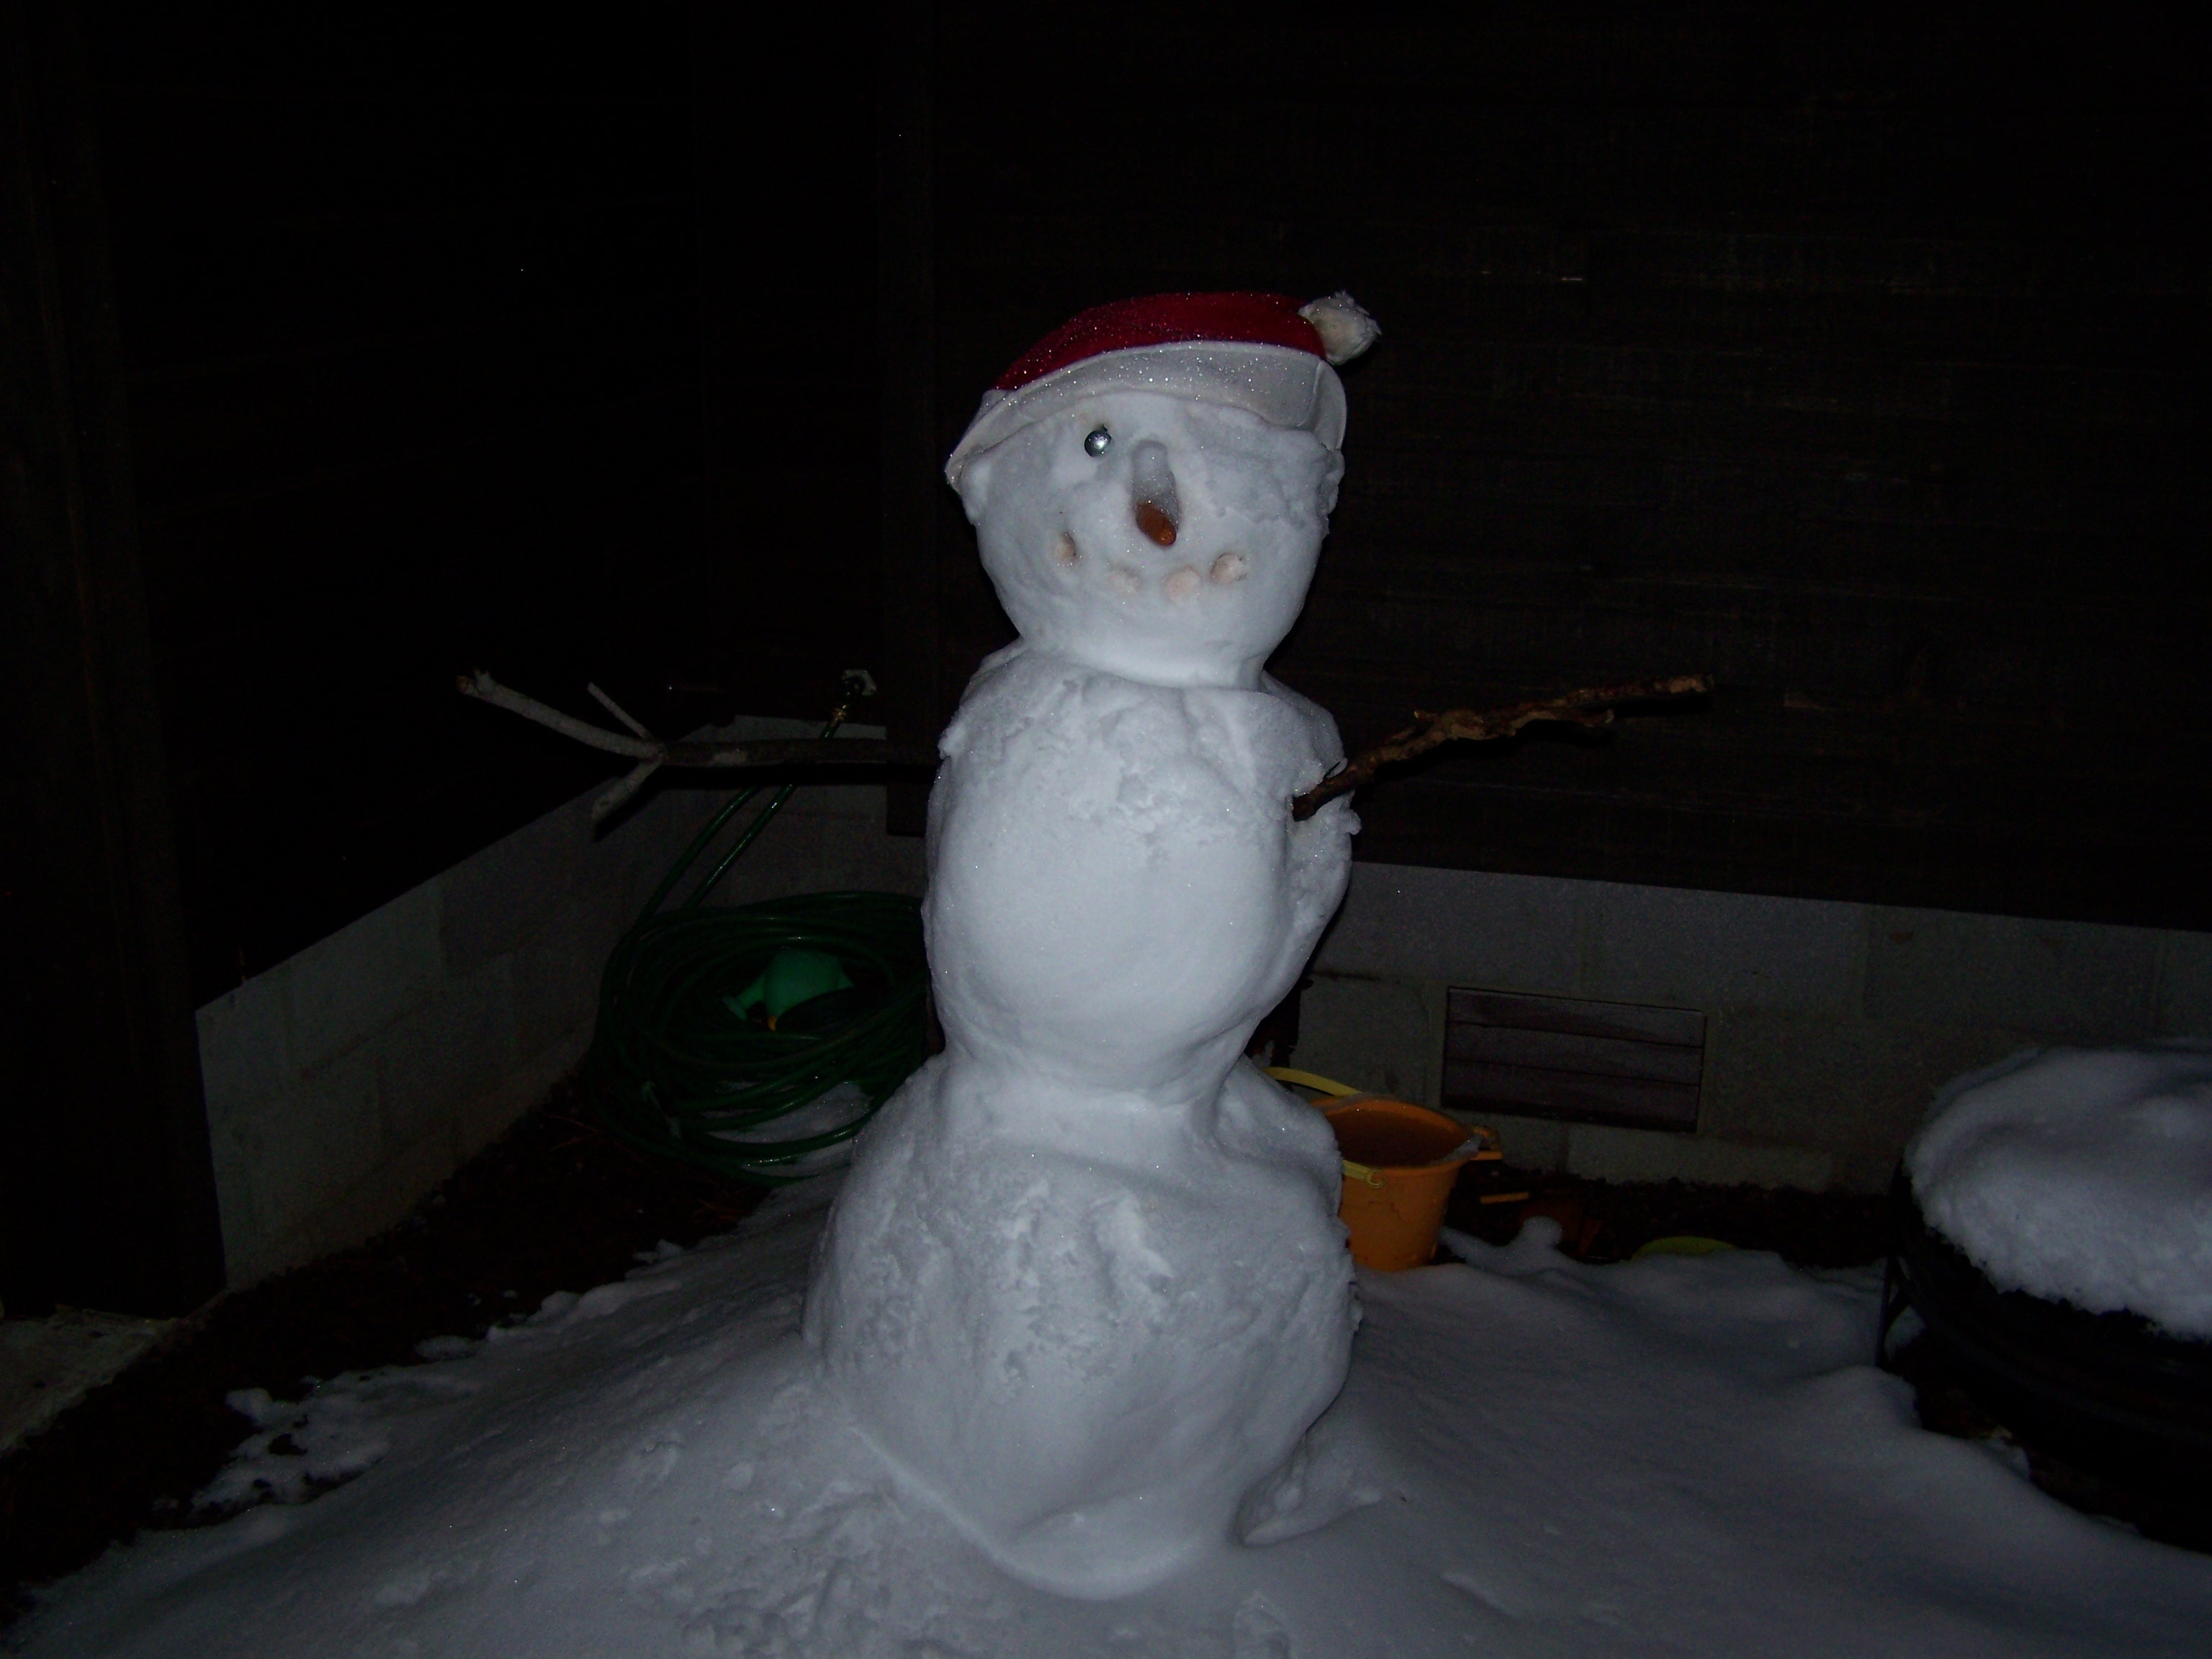 Our First Snowman